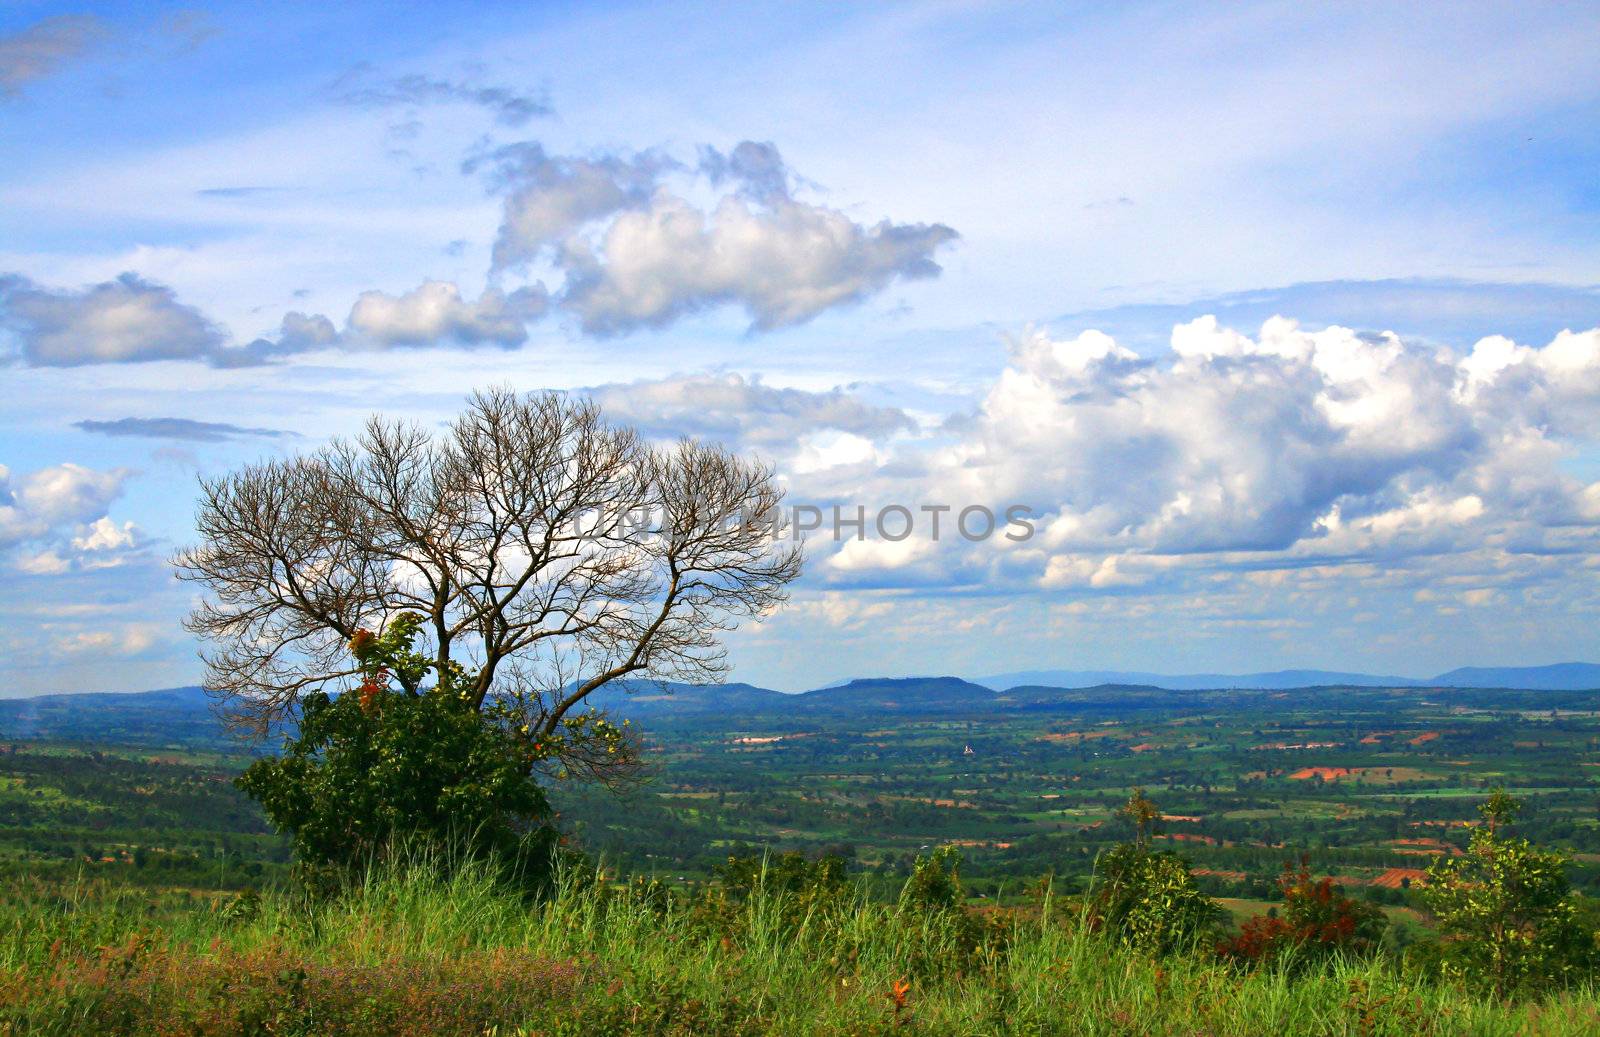 Alone bare tree on the hill by iampuay